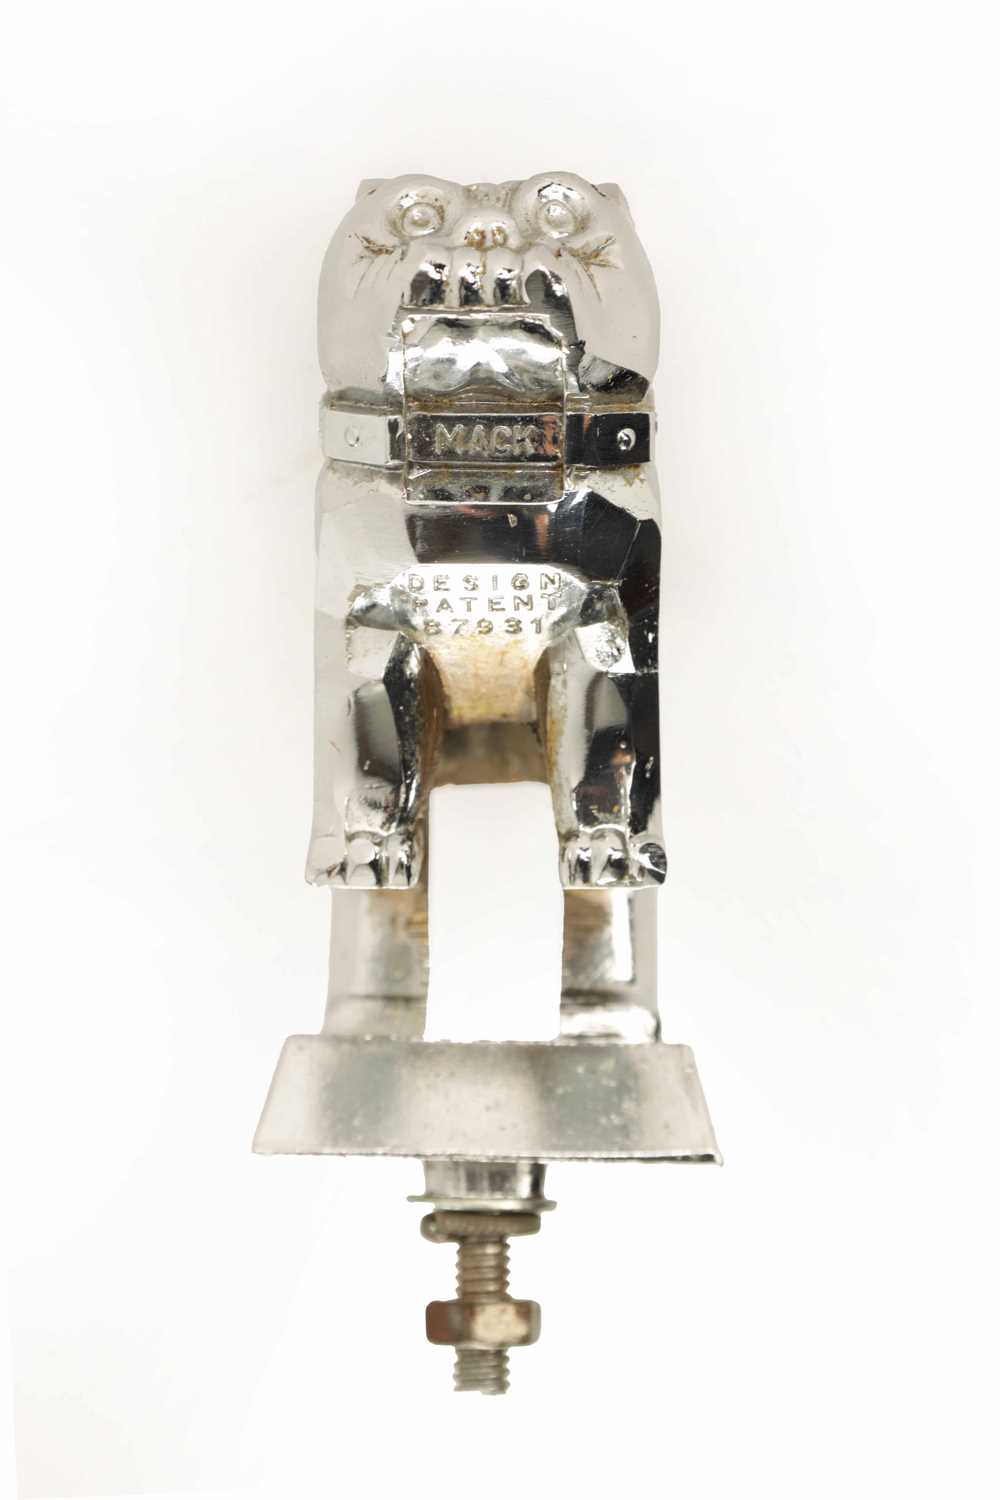 A VINTAGE CHROMED MAC TRUCK RADIATOR BULLDOG MASCOT TOGETHER WITH A CALORIMETER AND RADIATOR CAP WIT - Image 10 of 11